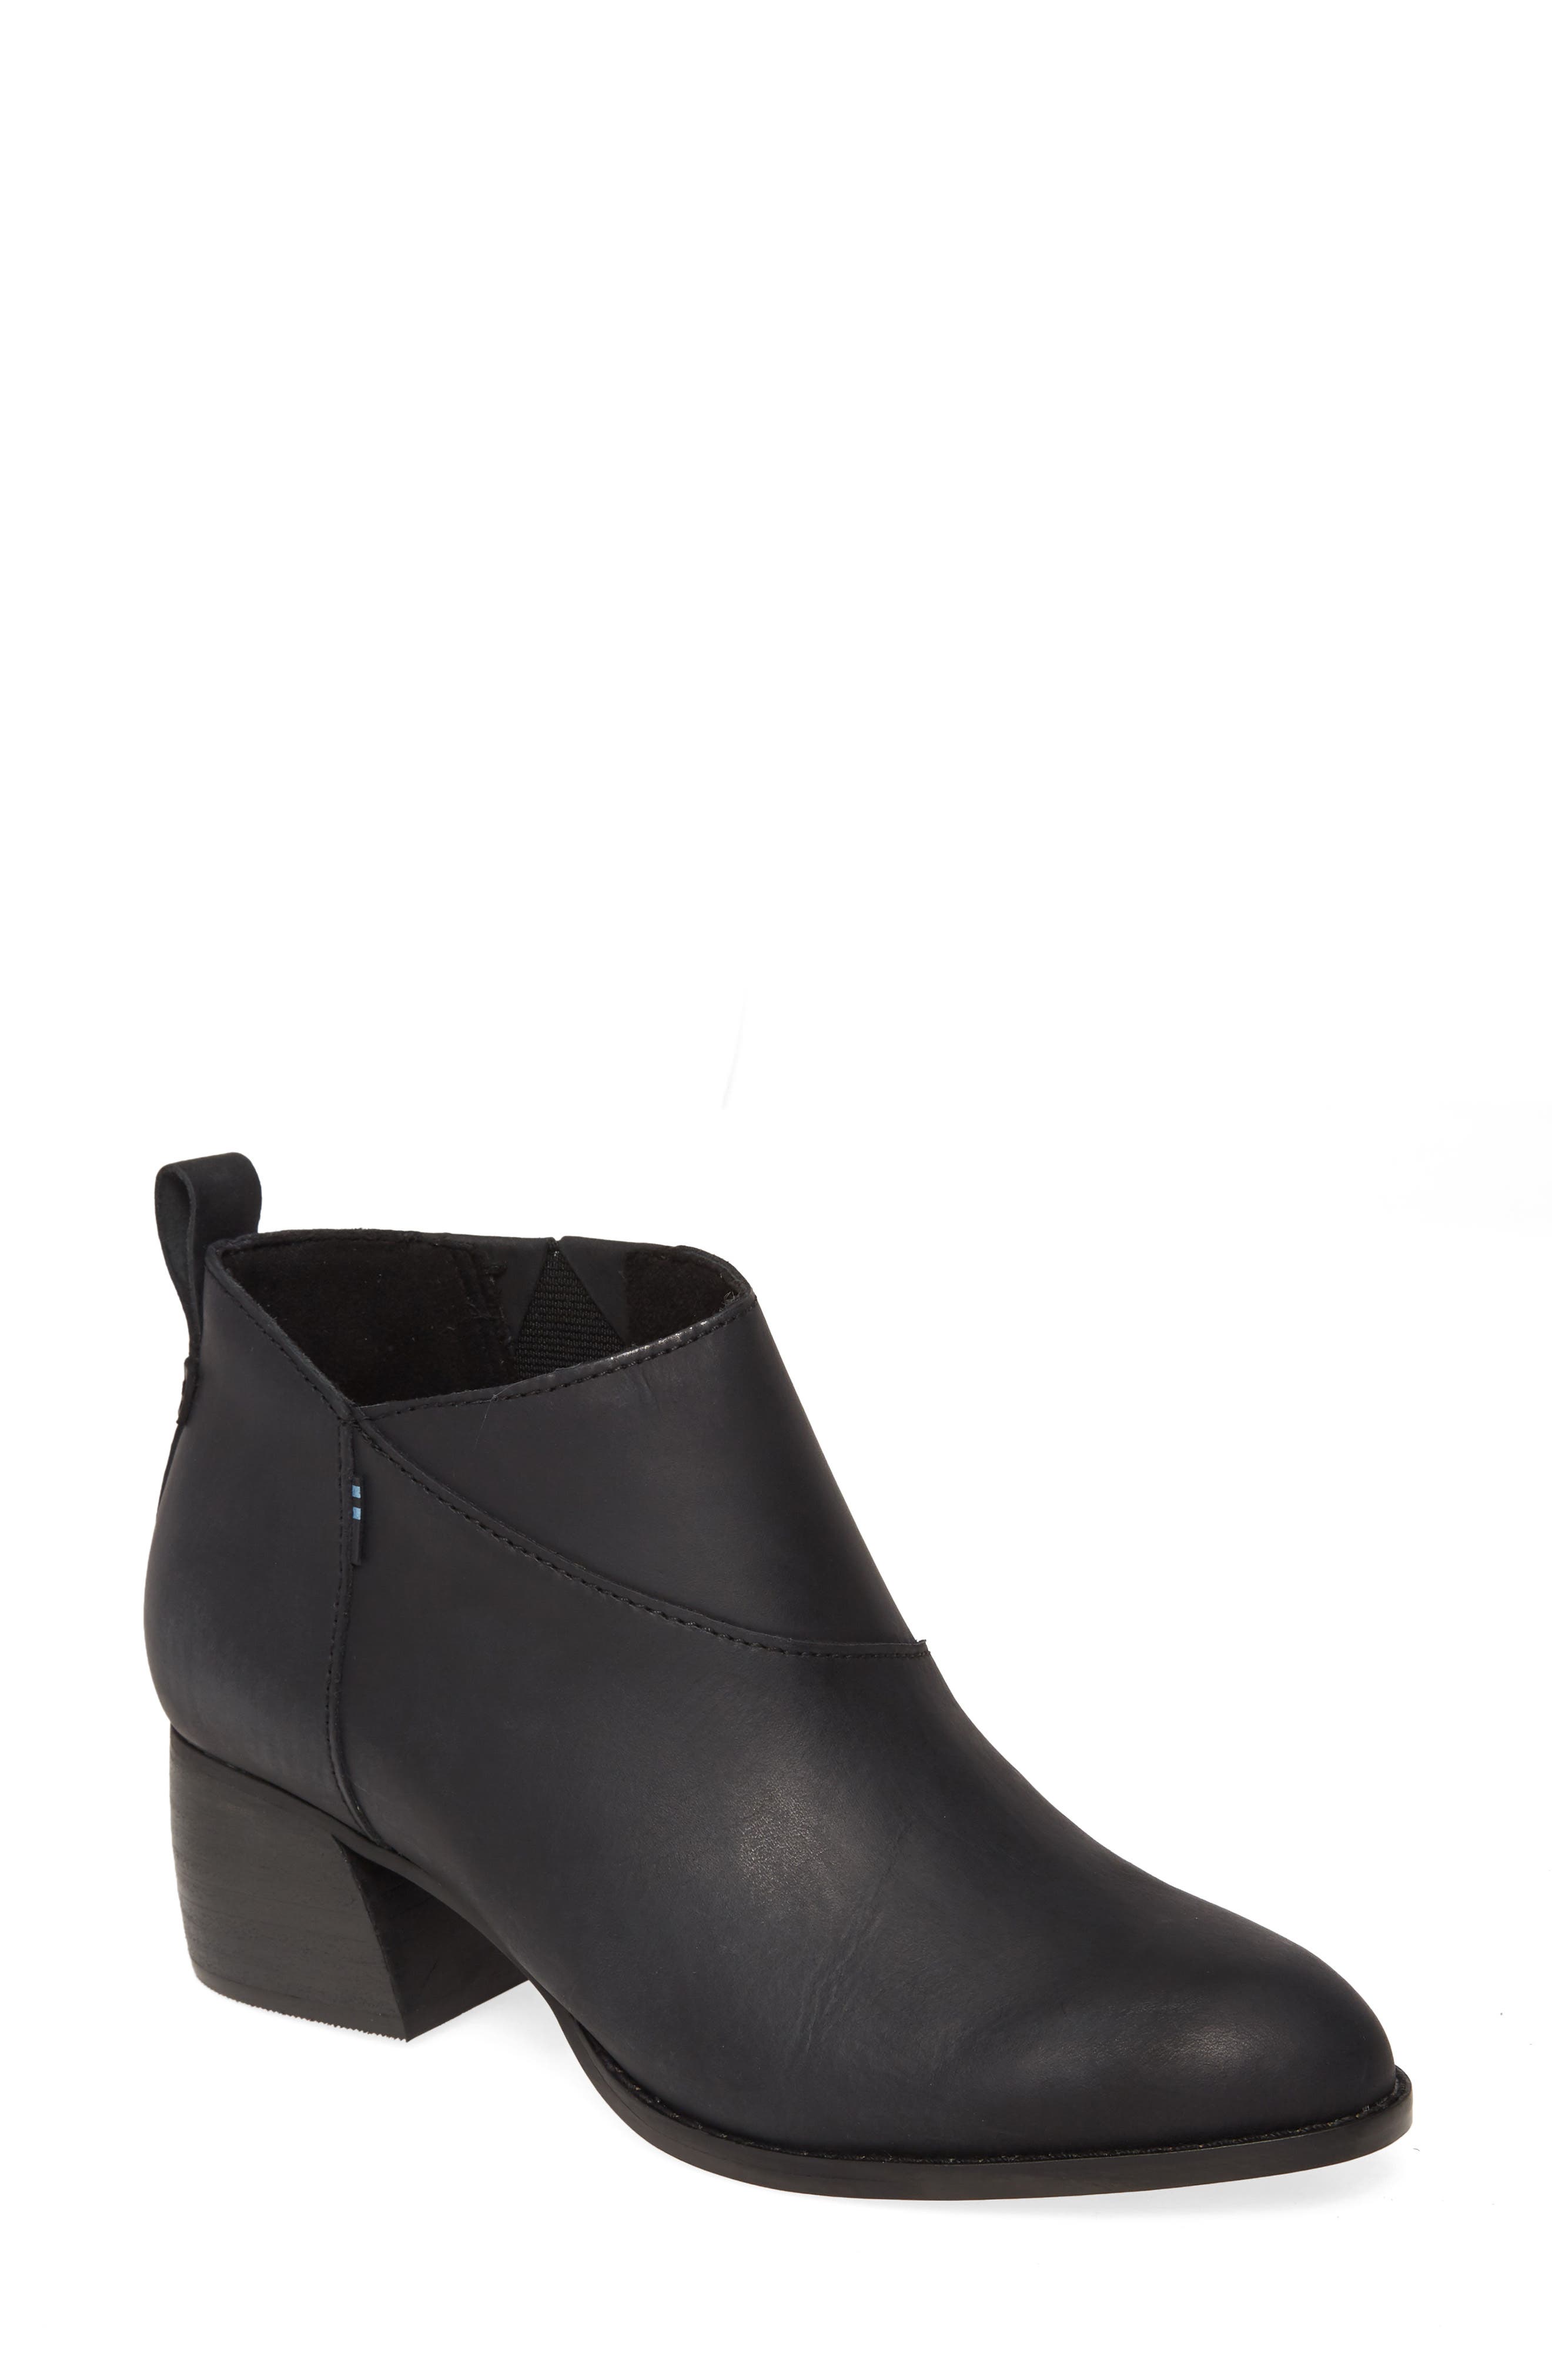 toms black leather booties